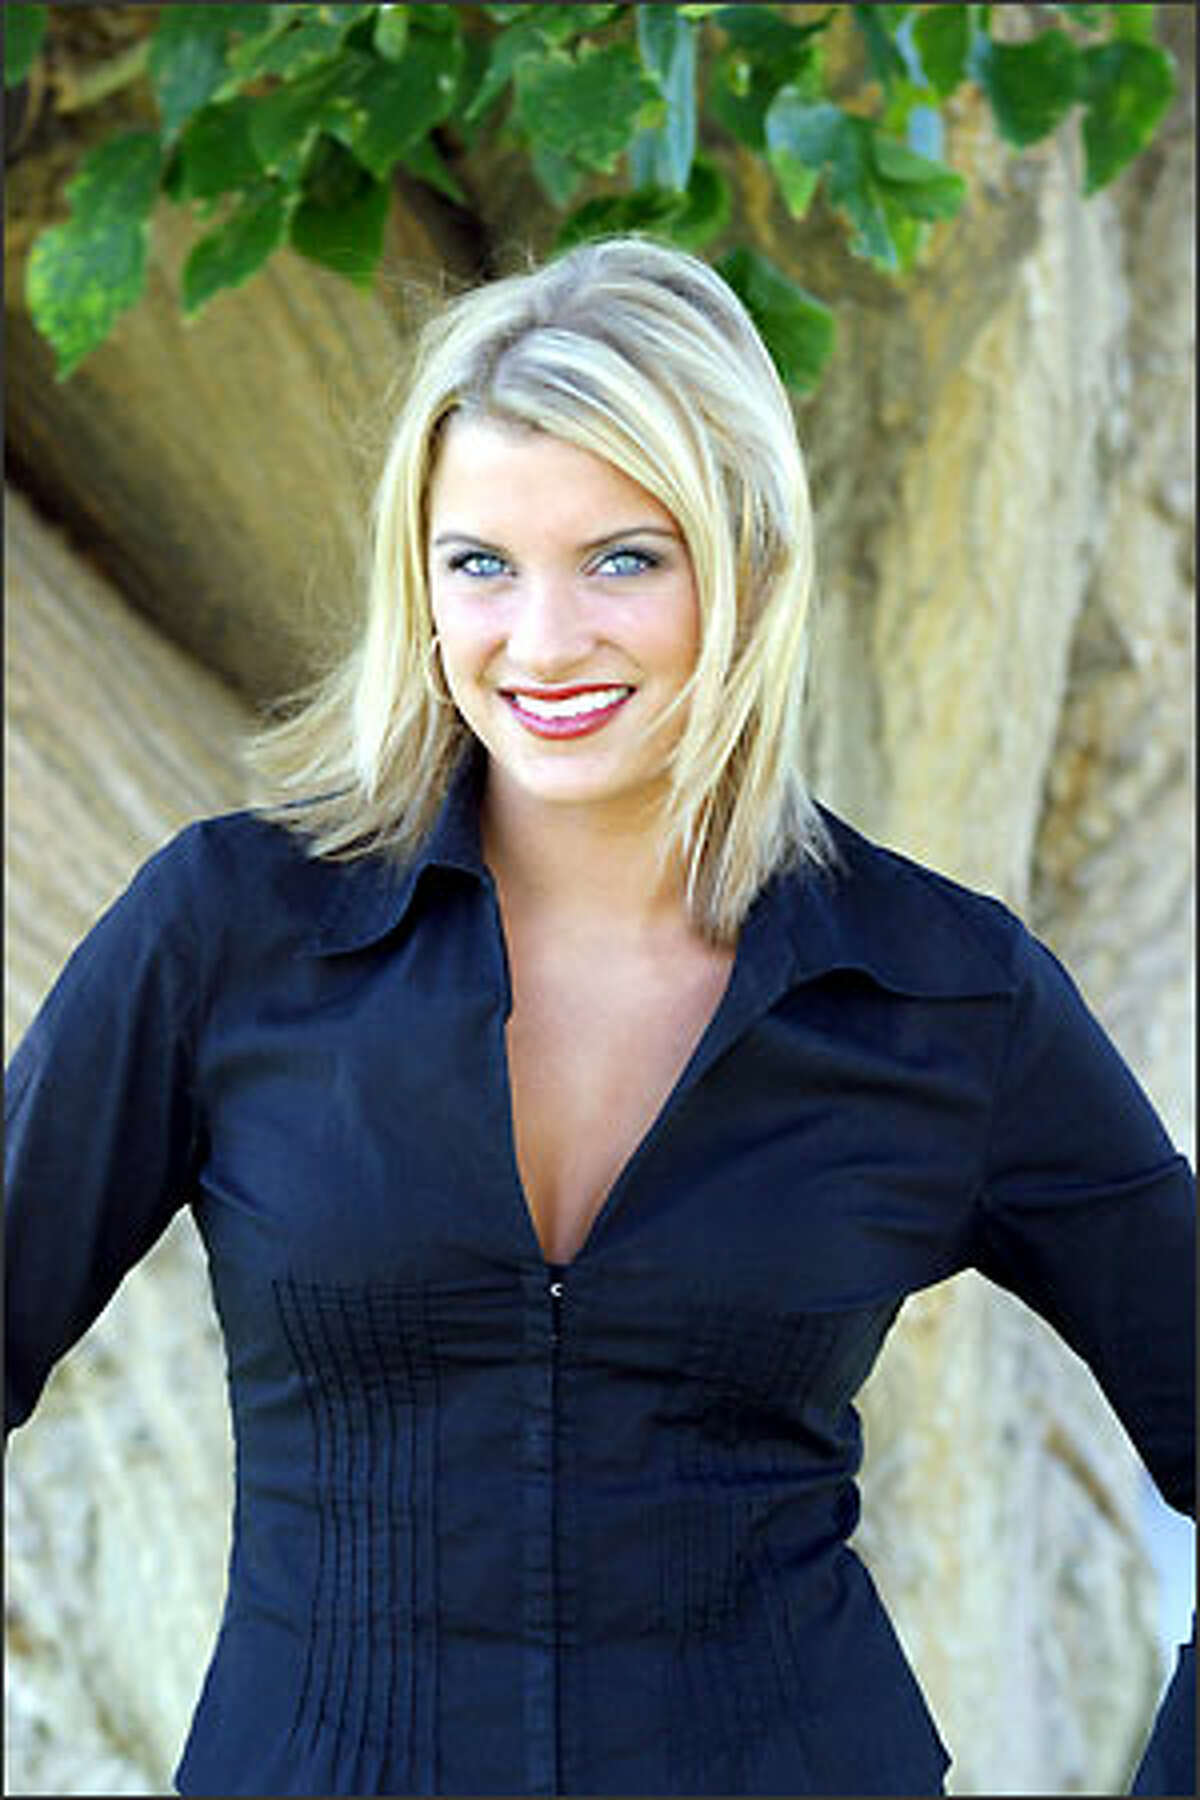 Seen here is Renee, a nanny from Issaquah and a quarterfinalist on "Are You Hot? The Search For America's Sexiest People" on the ABC Television Network.